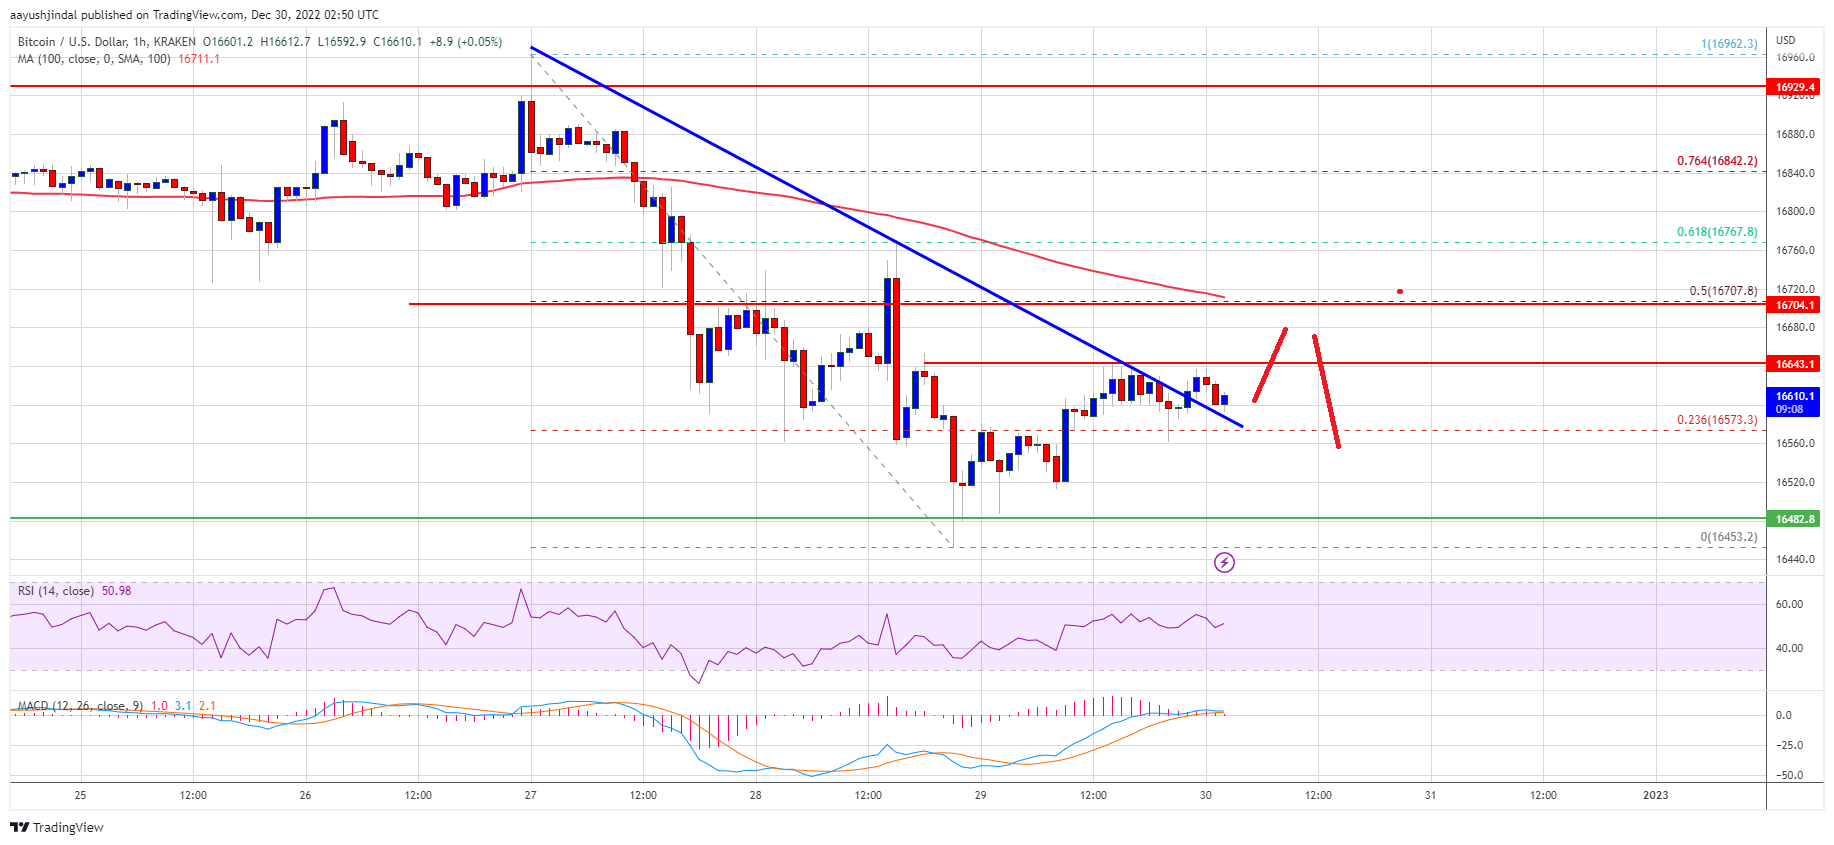 Bitcoin Price Could End The Year Further Lower, Key Resistance Intact